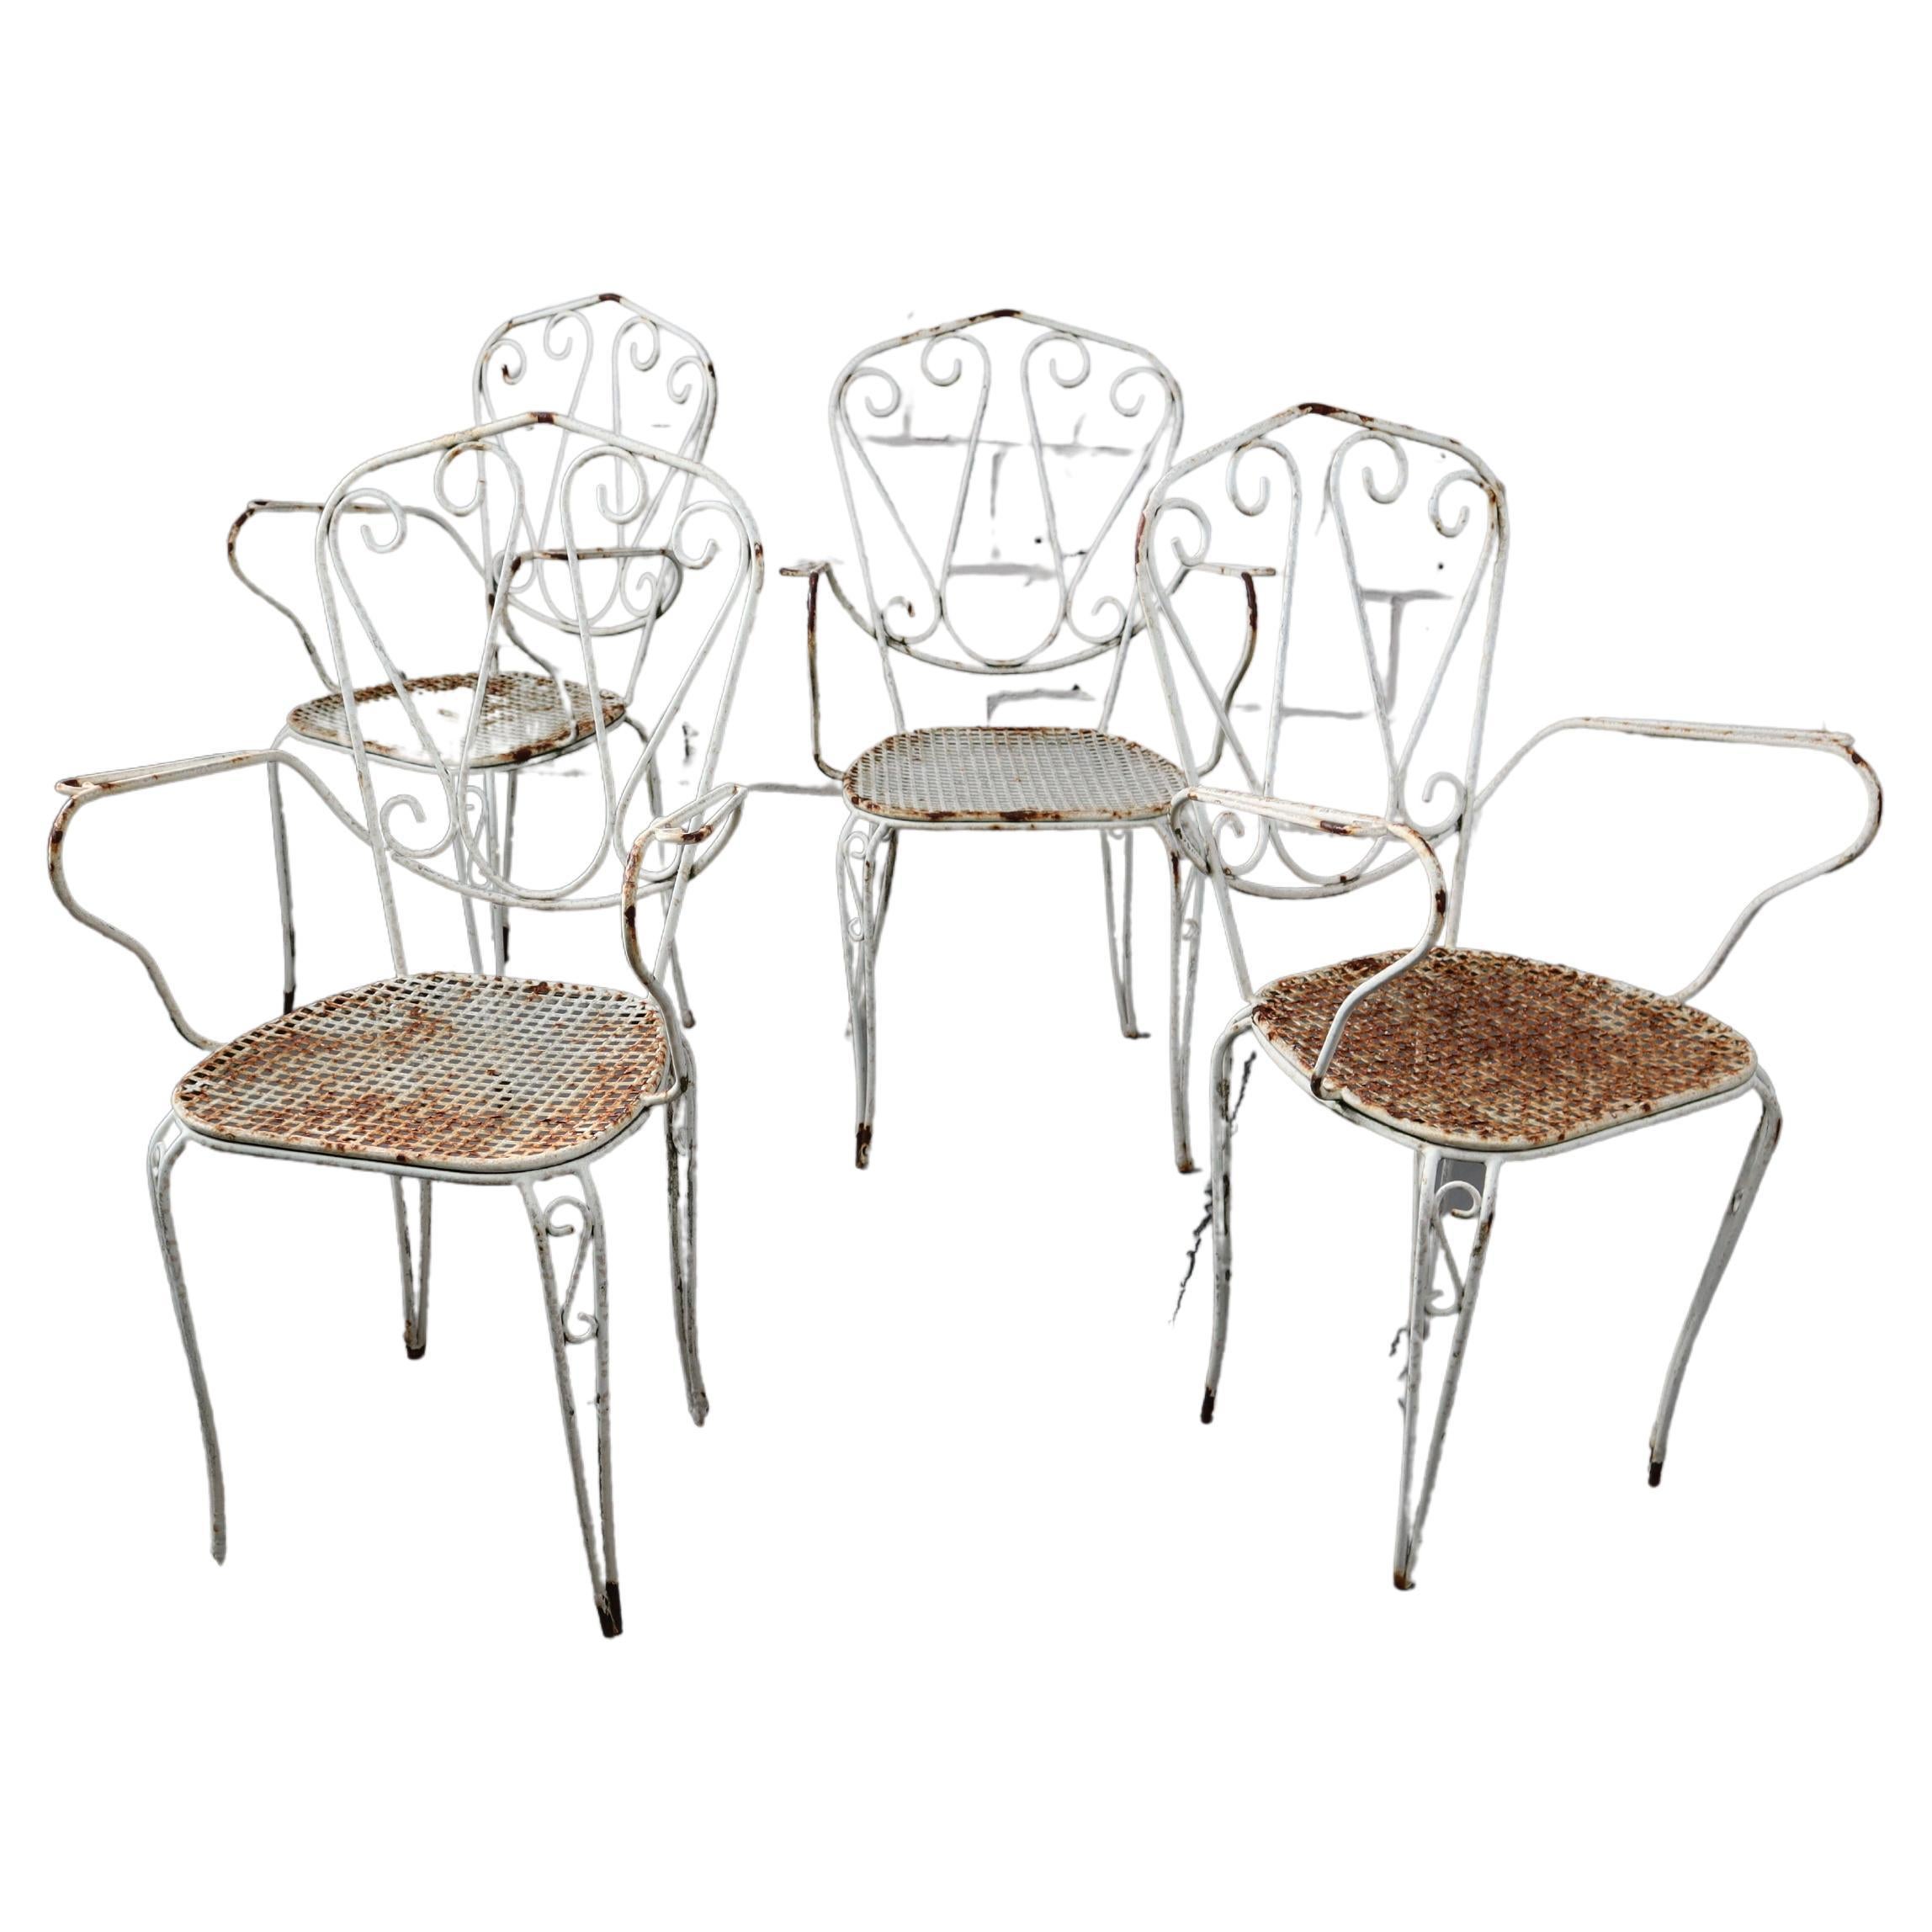 Set of Four Weathered Iron Garden Chairs